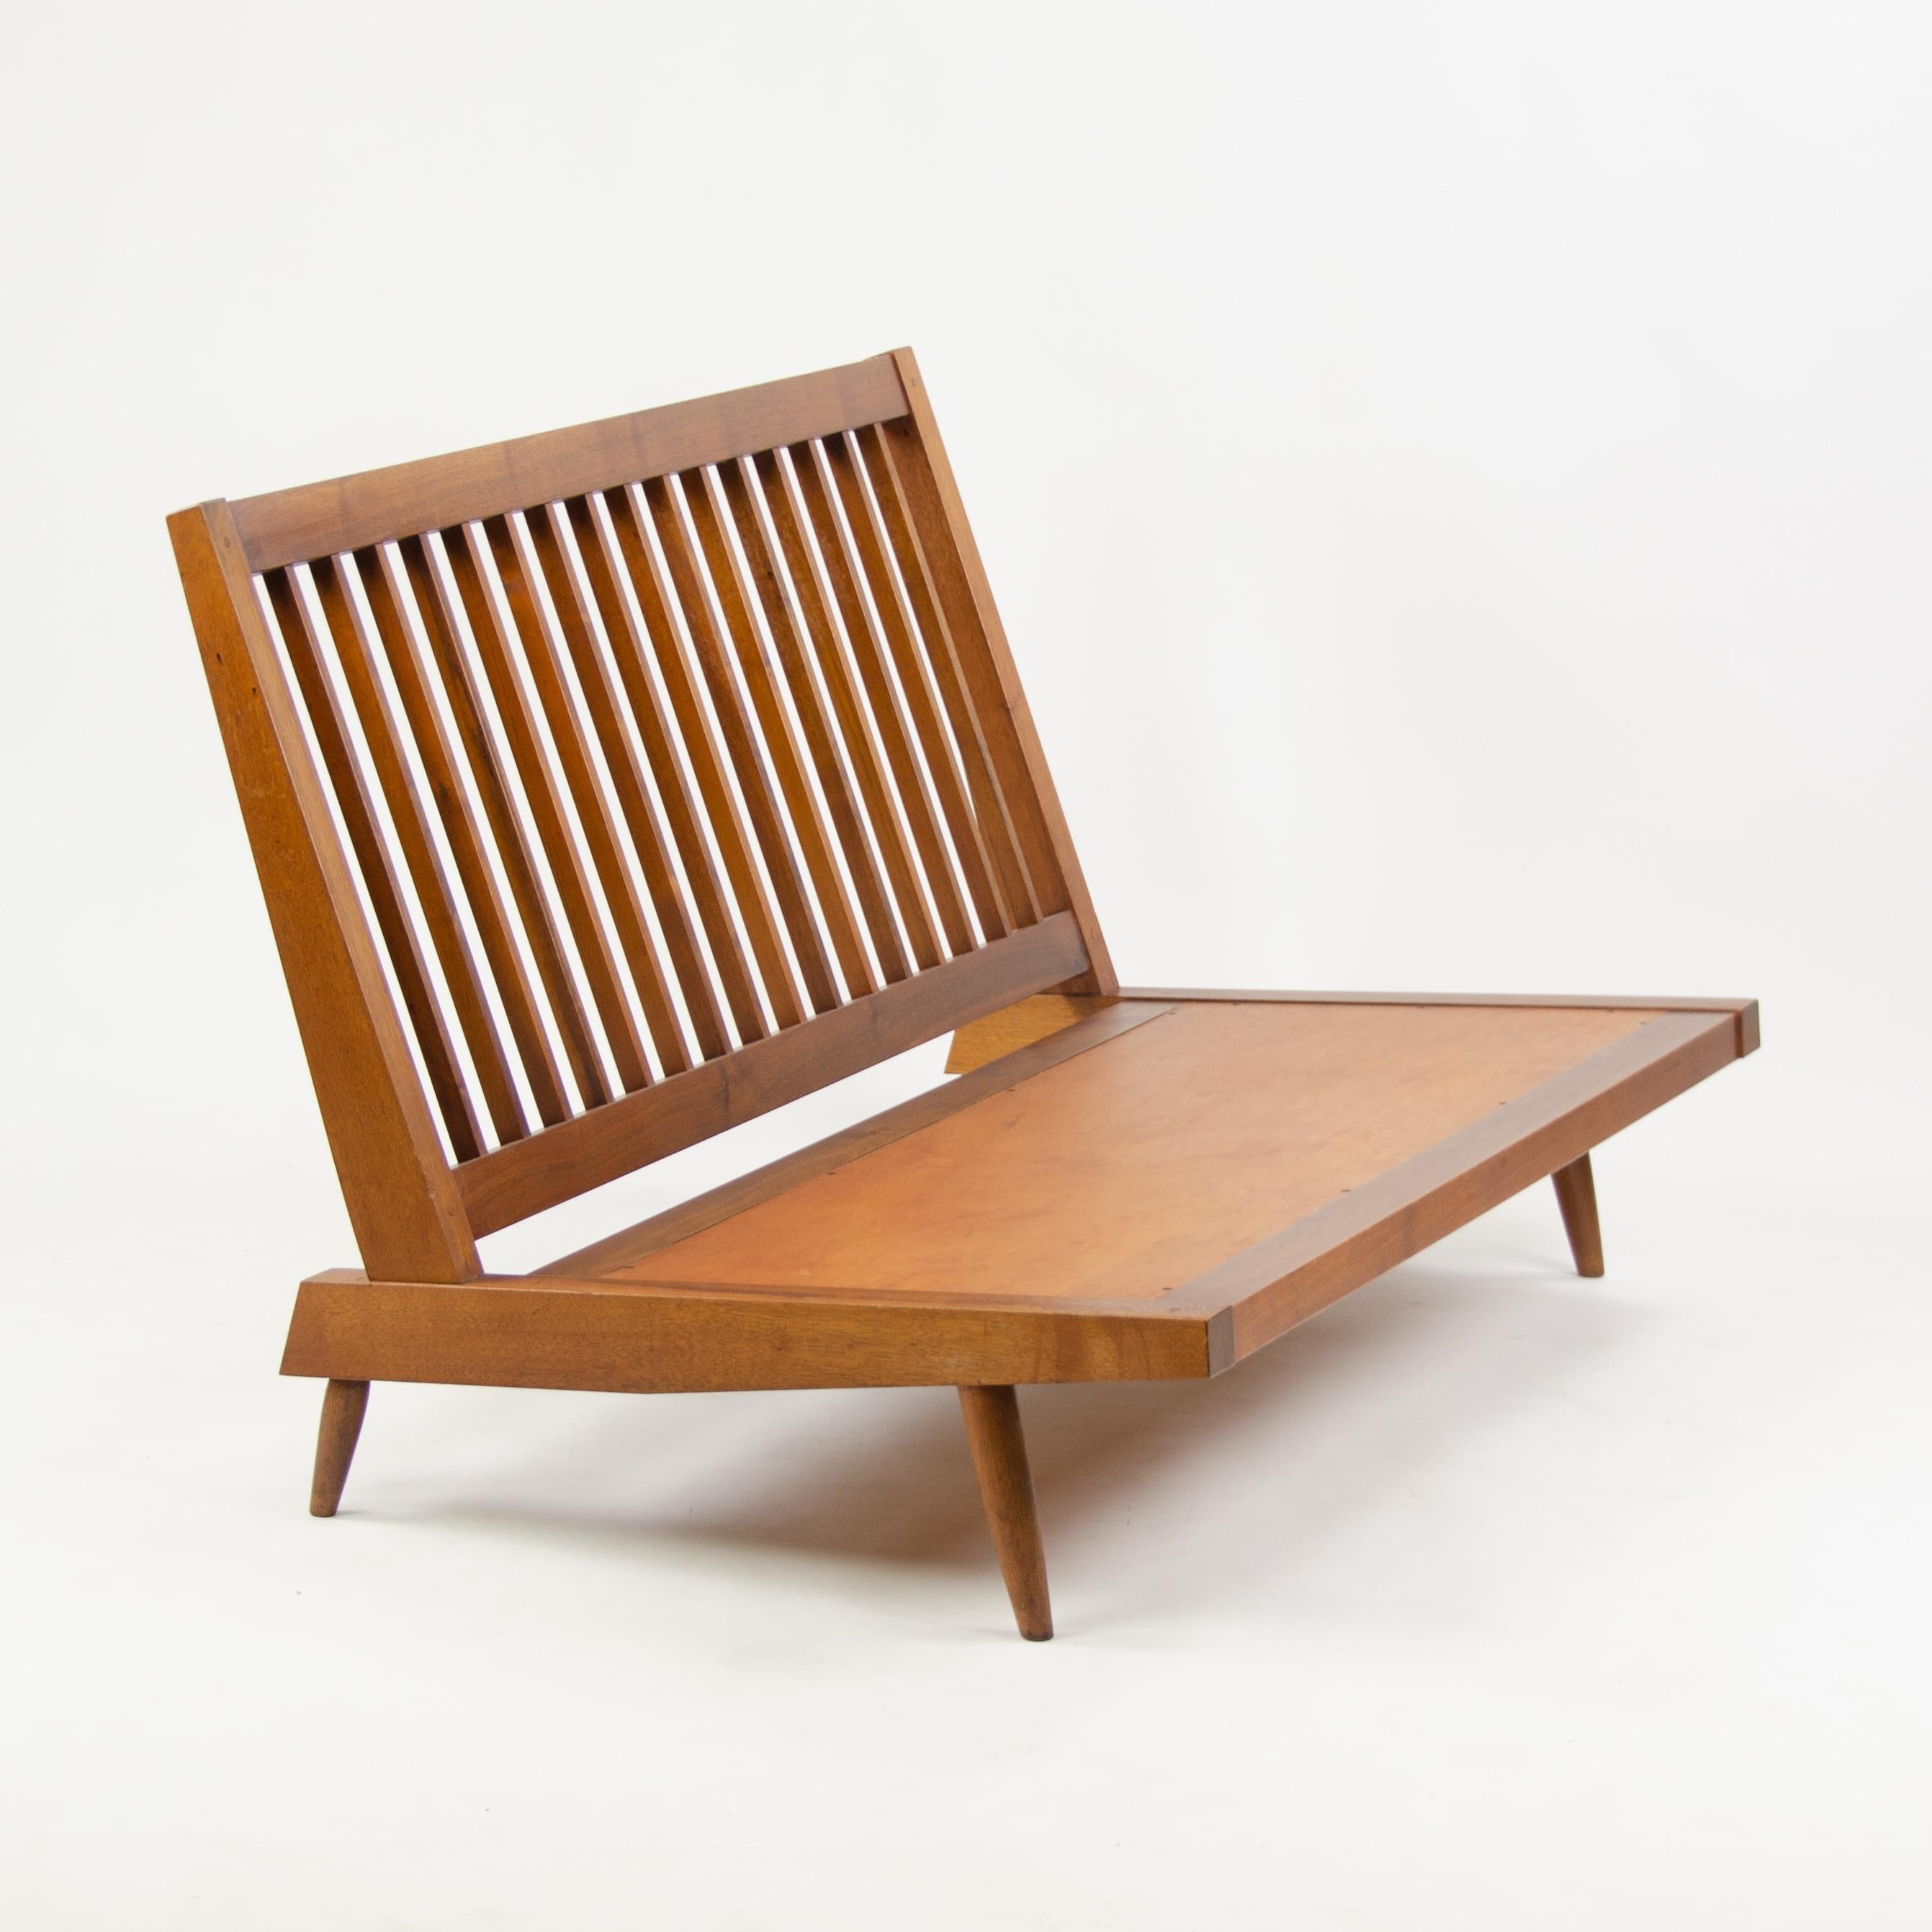 Listed for sale is a settee, crafted by George Nakashima circa 1966. This is an iconic example of the slatted lounge series, which followed a design language through the forms of both long settees and more slender lounge chairs.

This particular